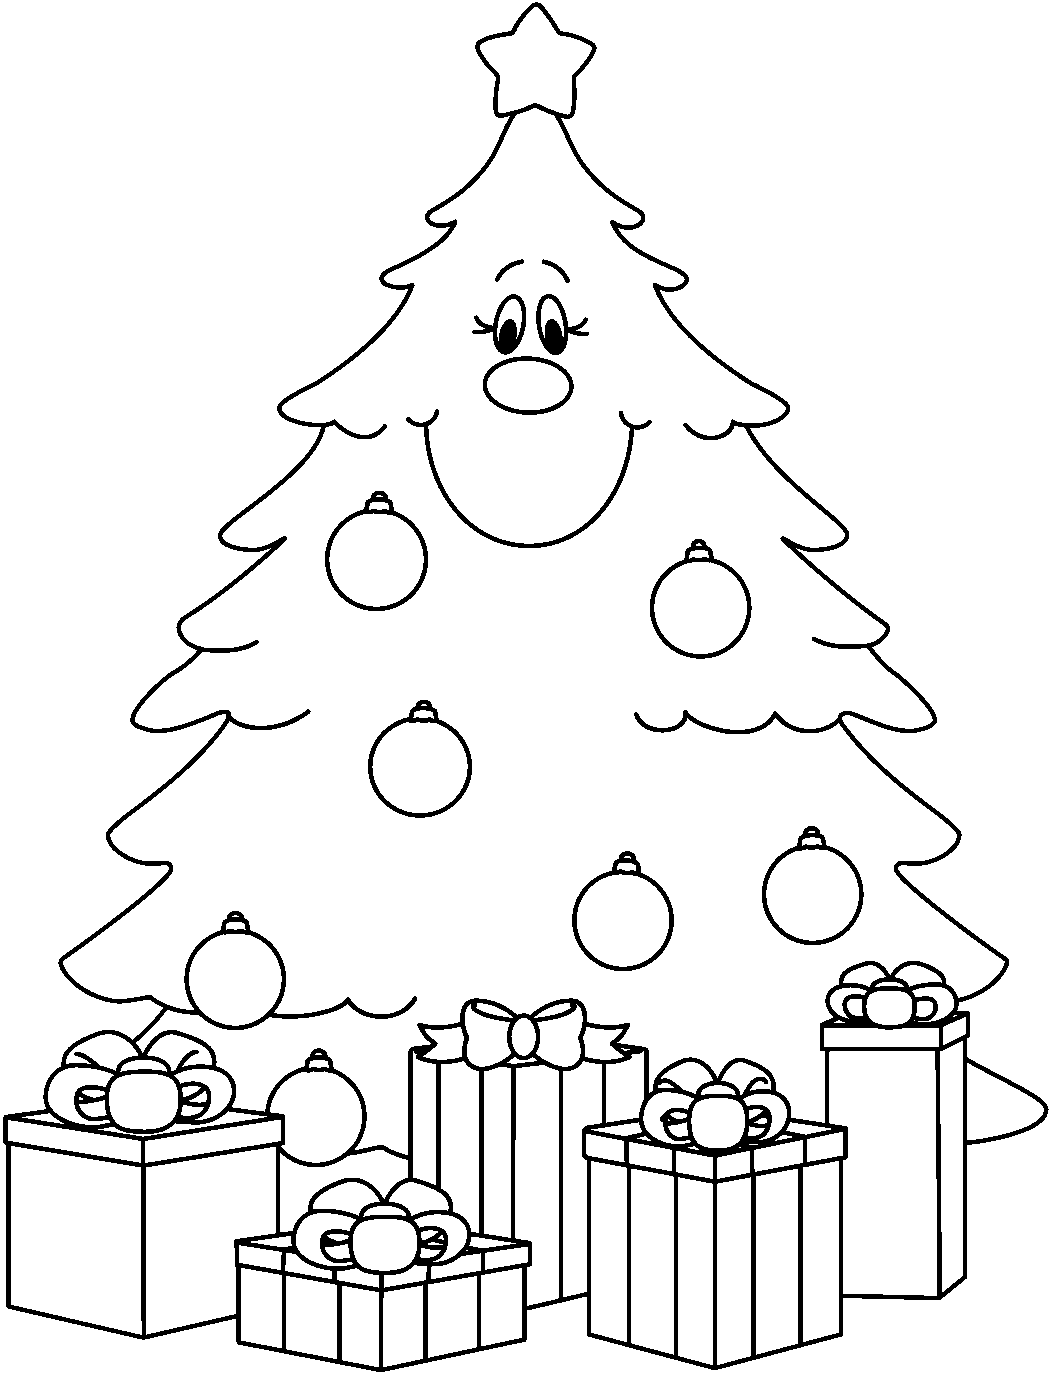 black and white tree clipart